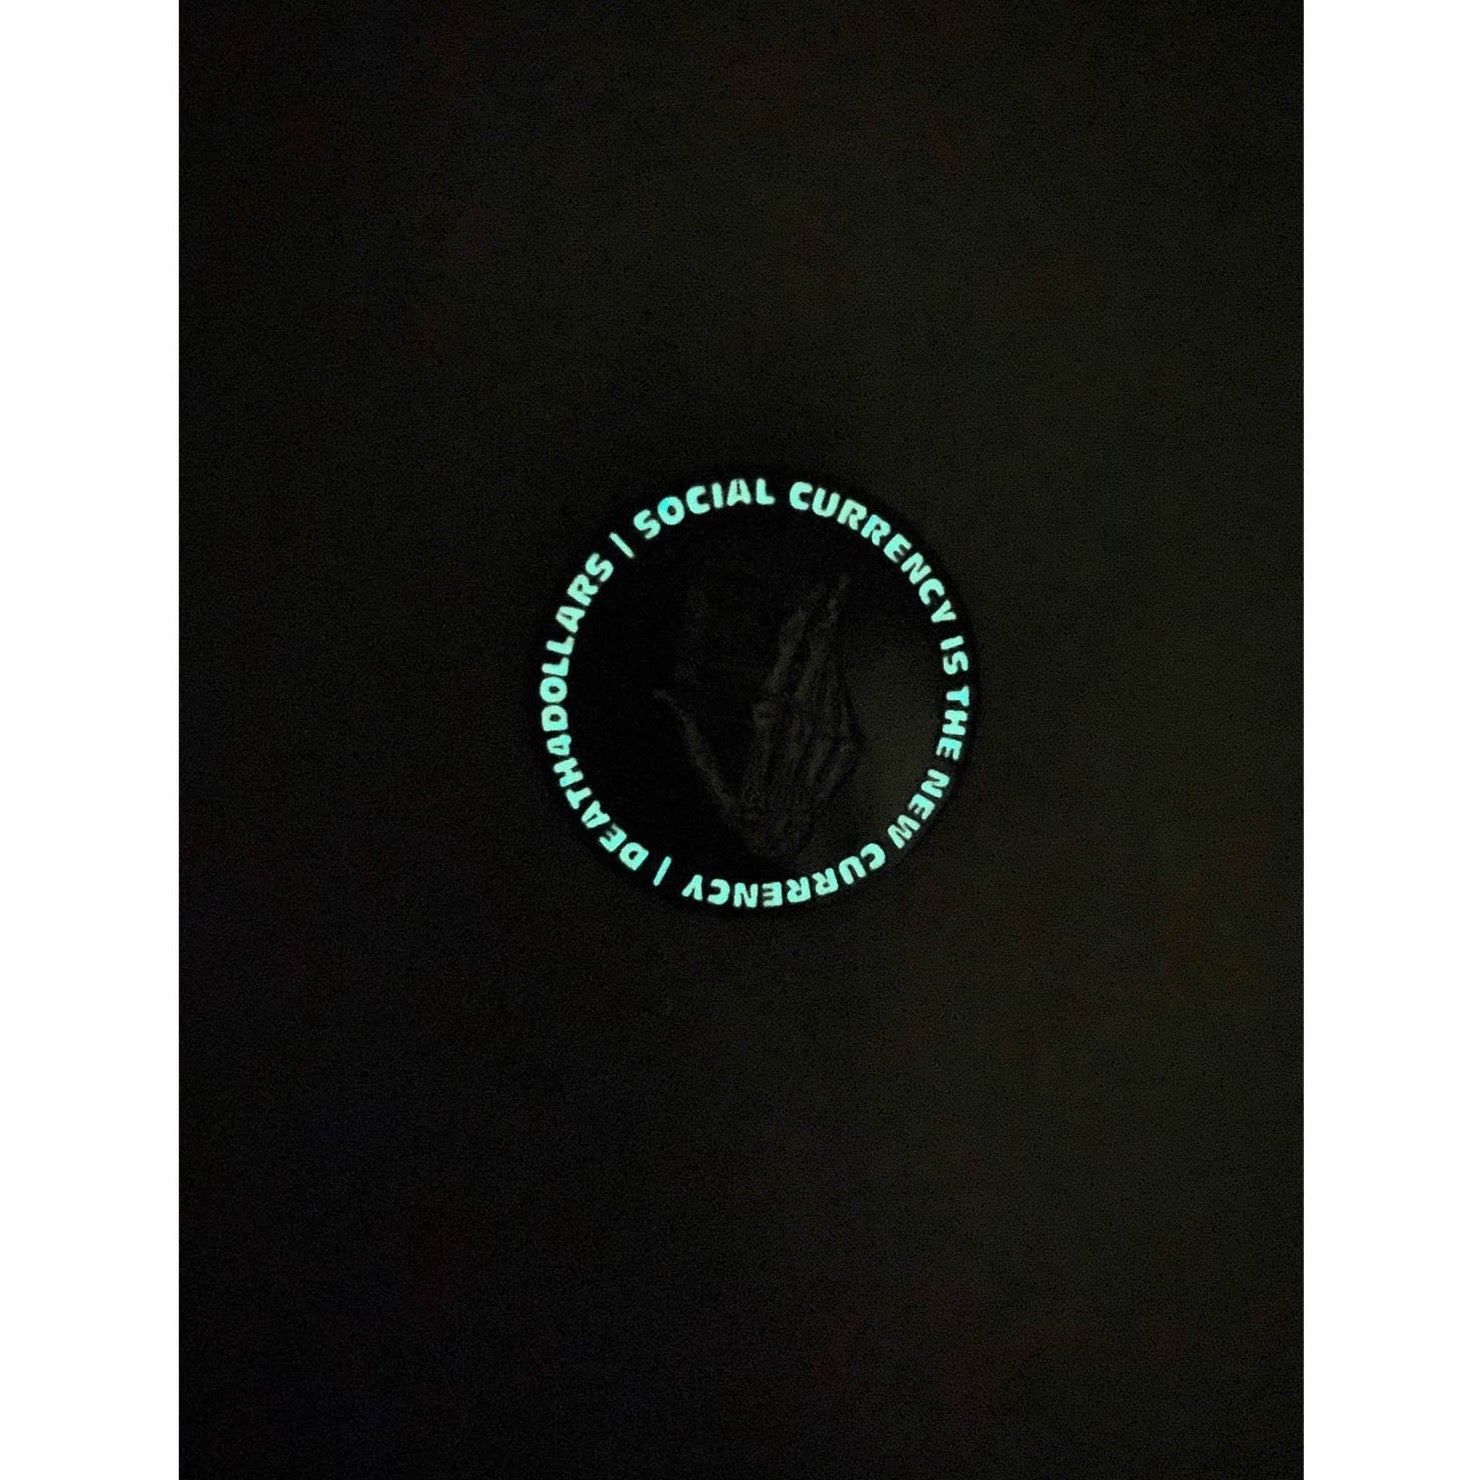 Social Currency Glow in the Dark Pin - Death4Dollars